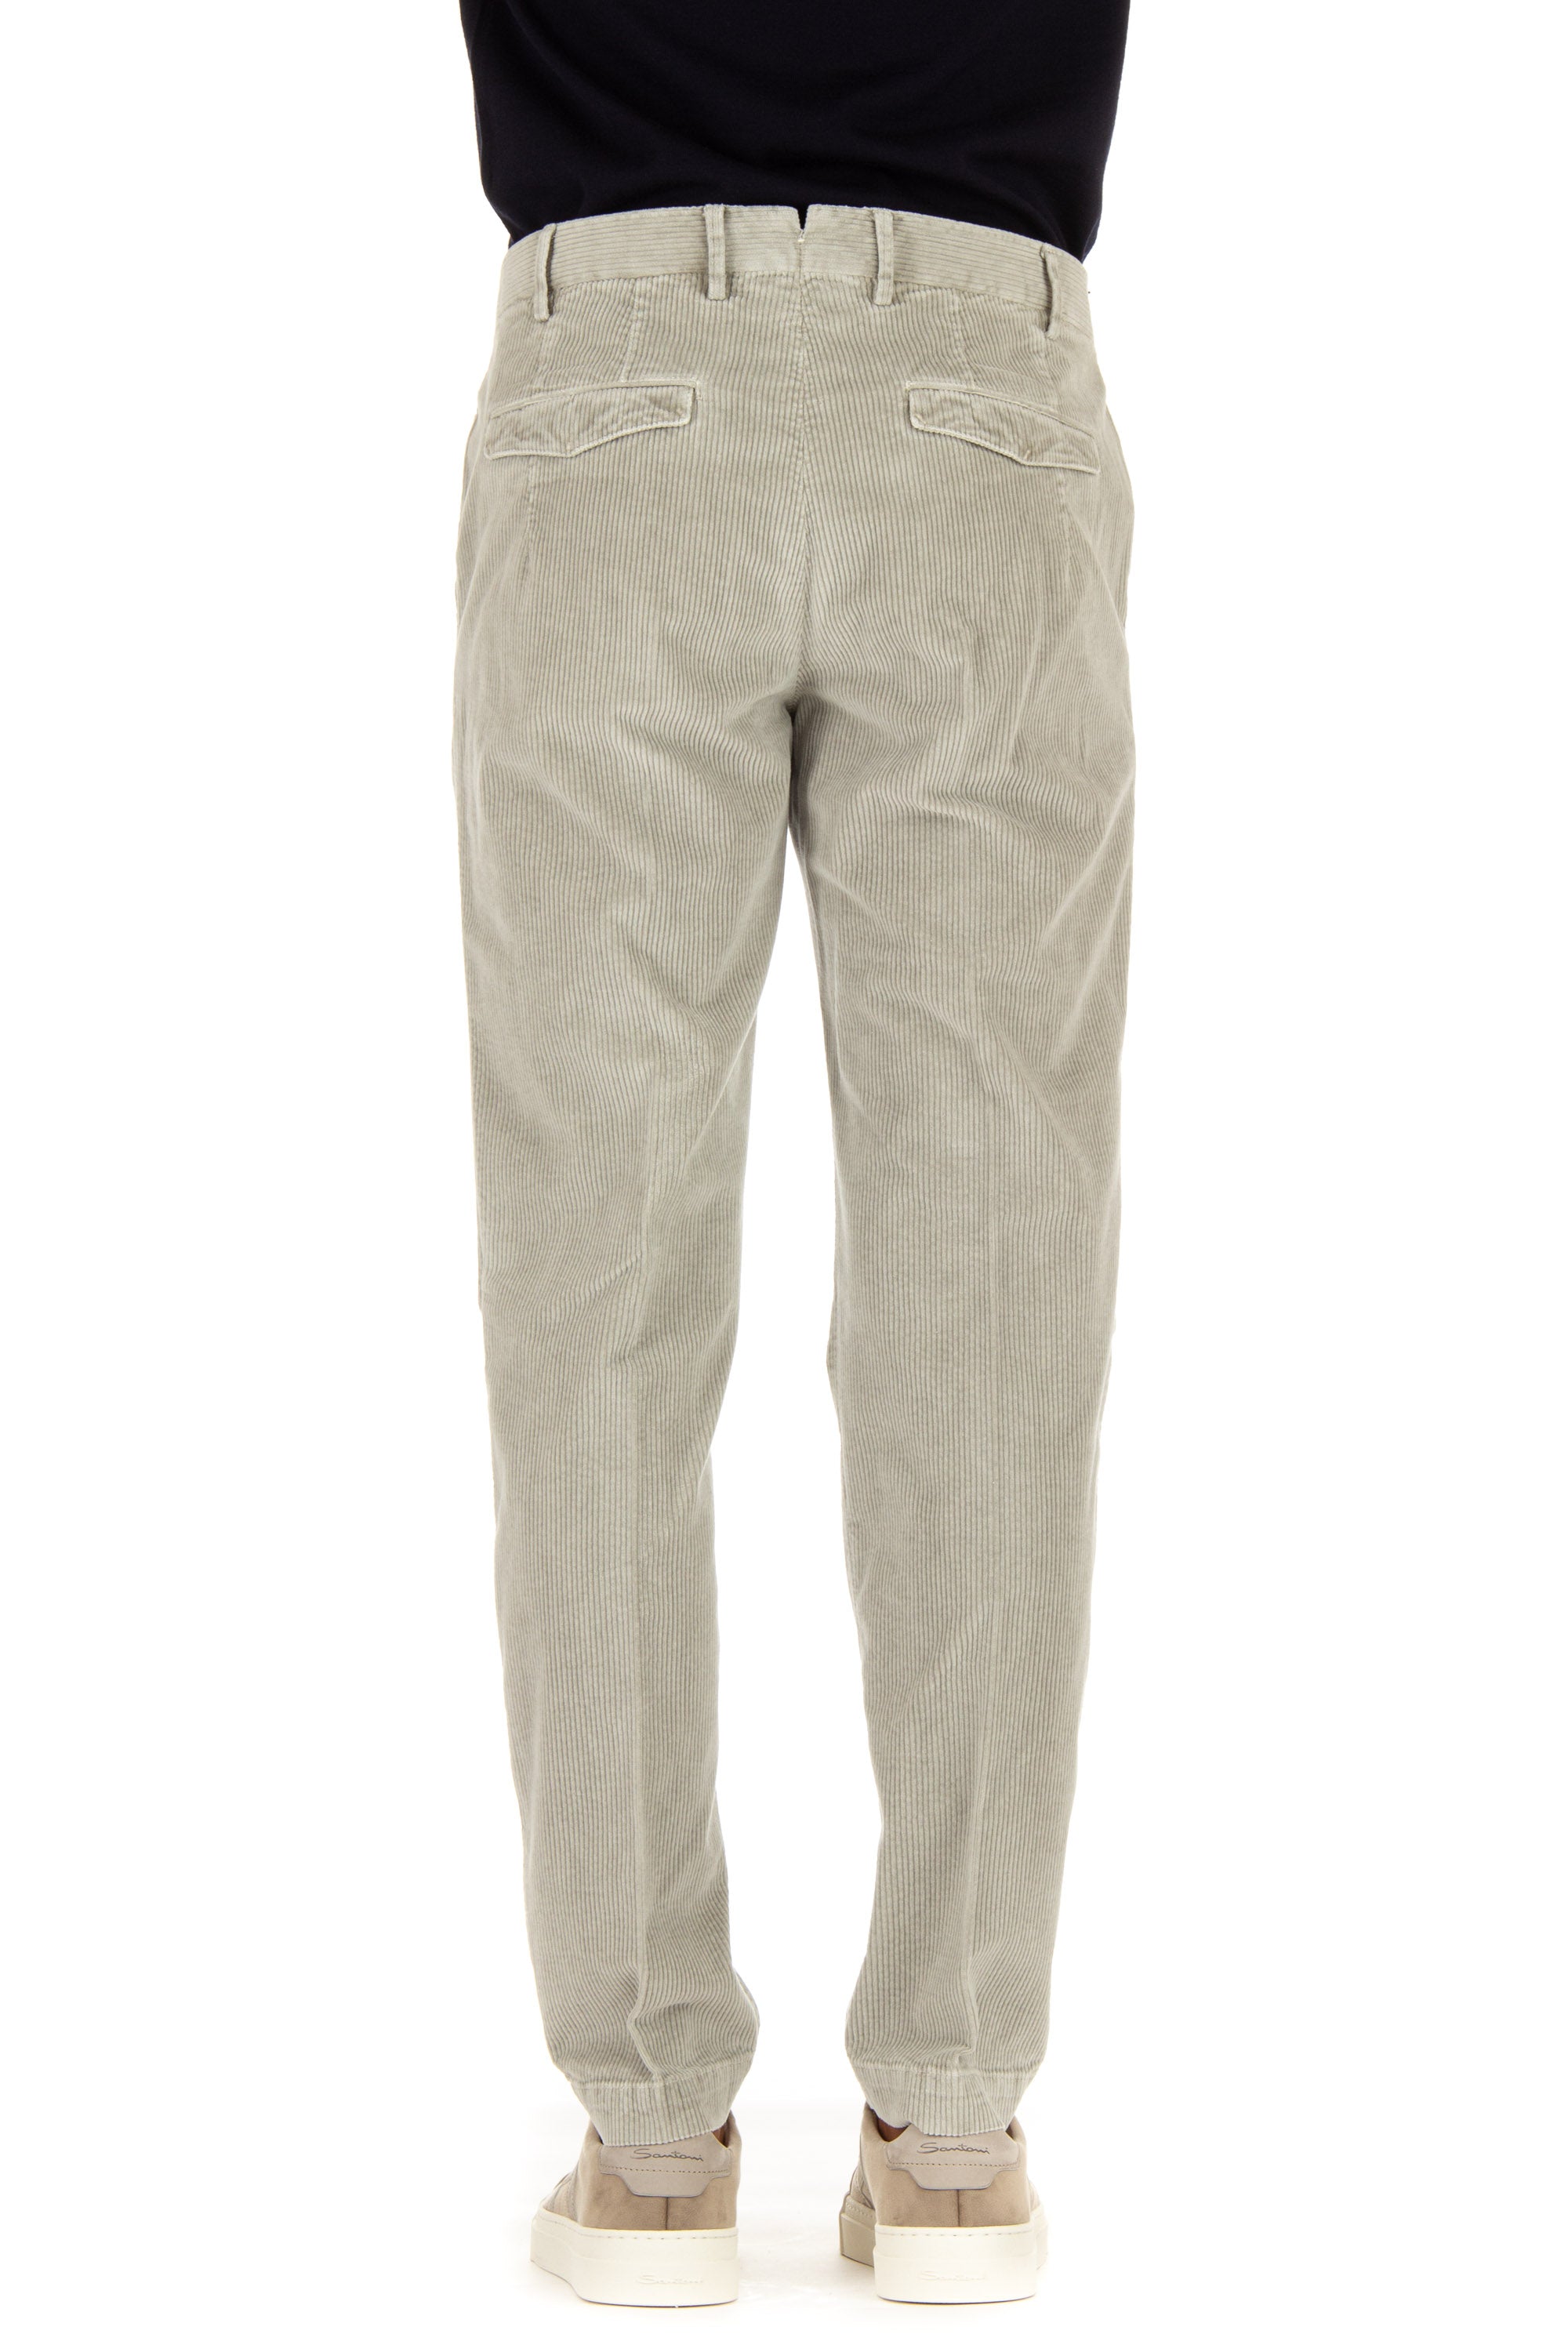 Pantalone in velluto 500 righe master fit